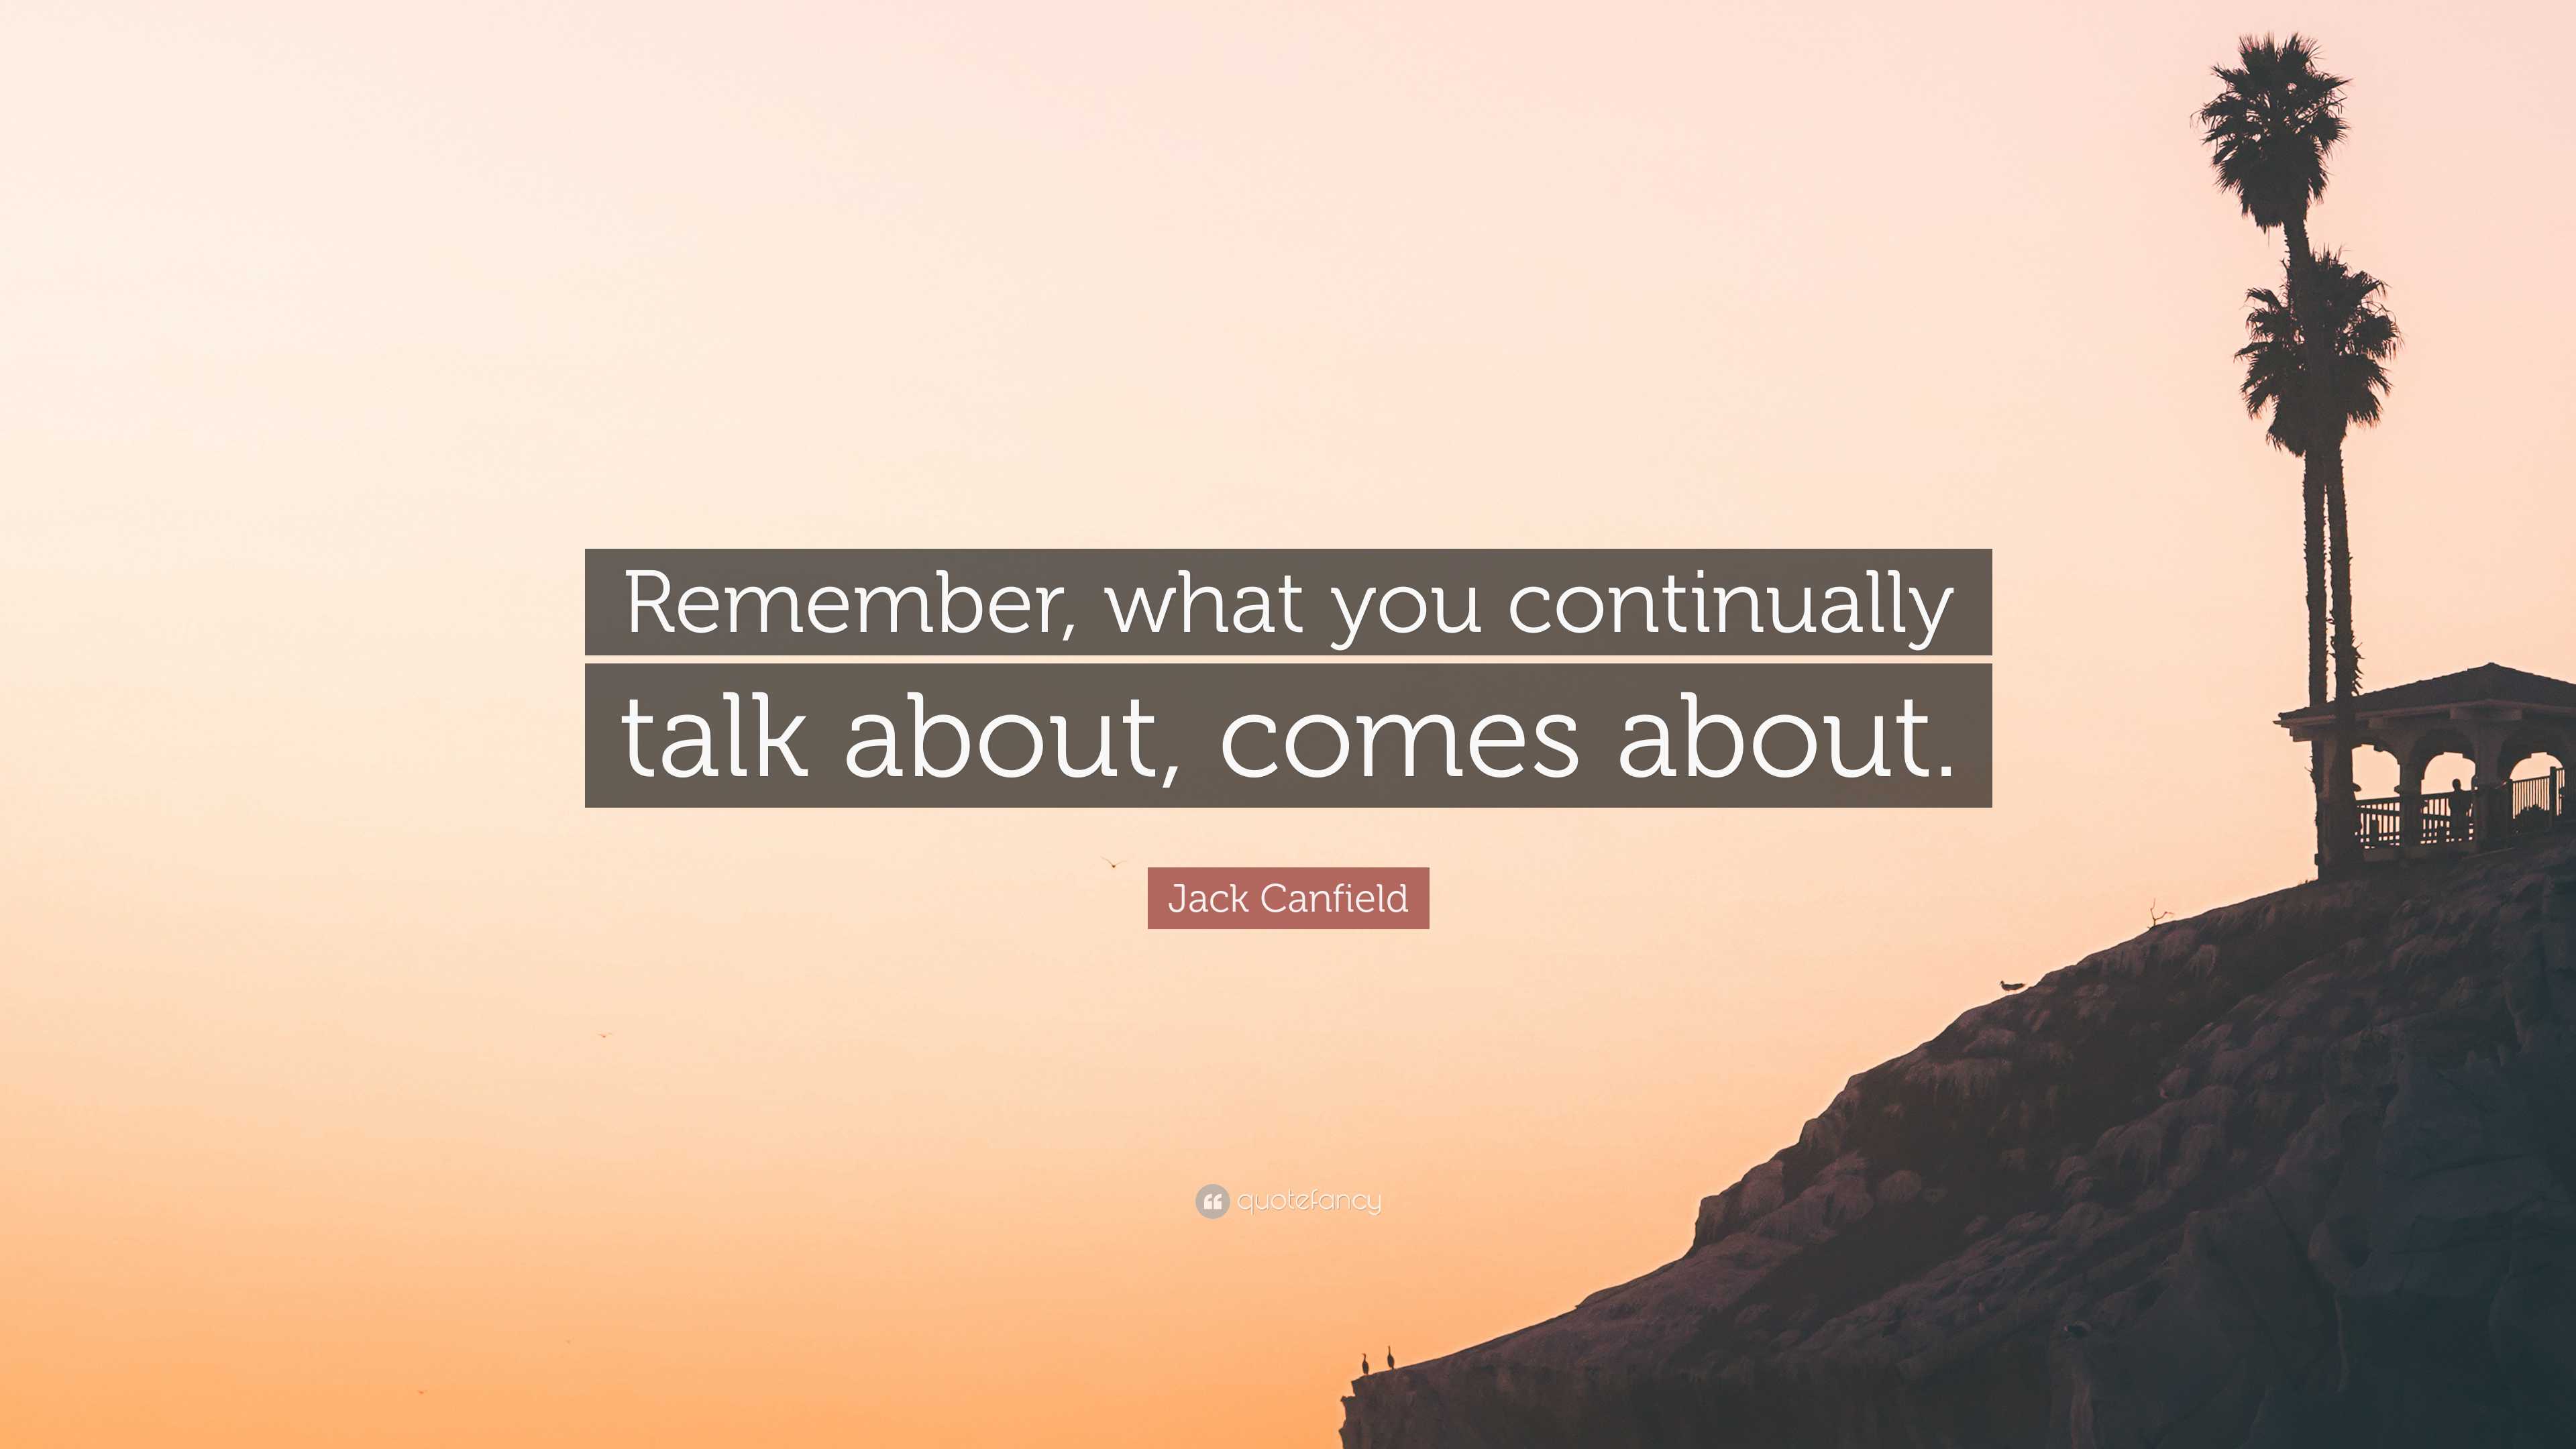 Jack Canfield Quote: “Remember, what you continually talk about, comes ...